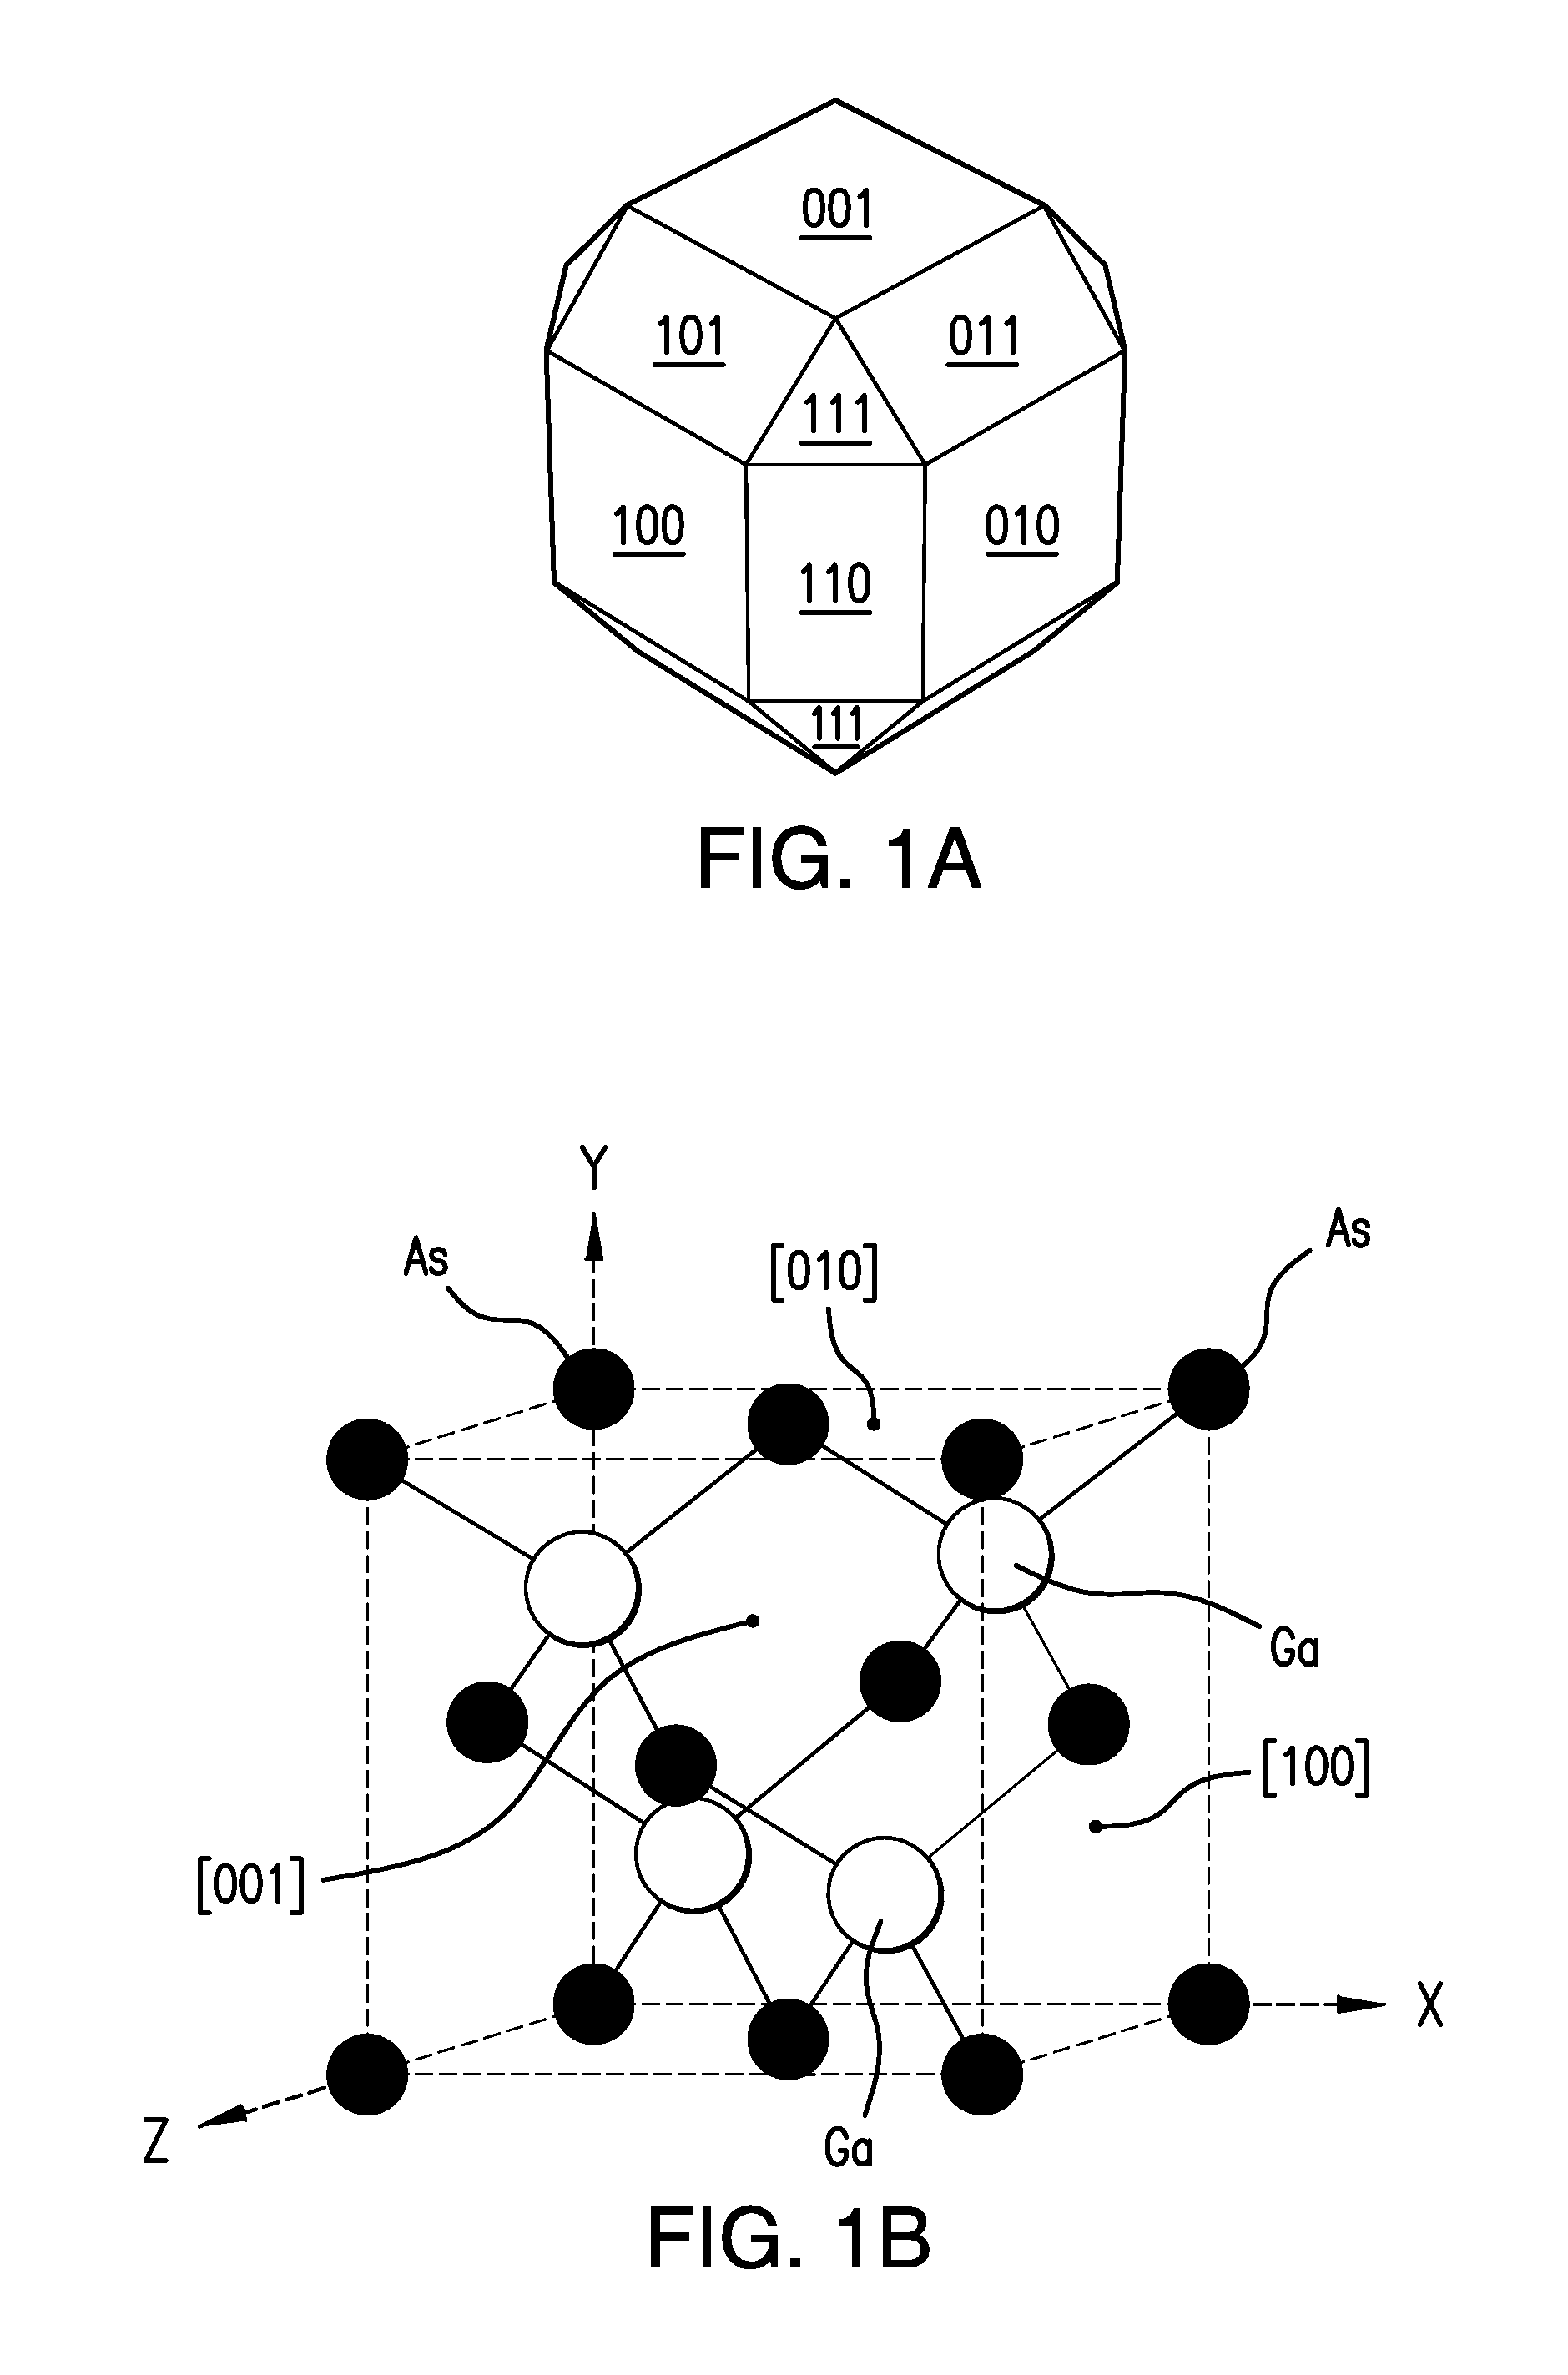 Inverted metamorphic multijunction solar cell with surface passivation of the contact layer